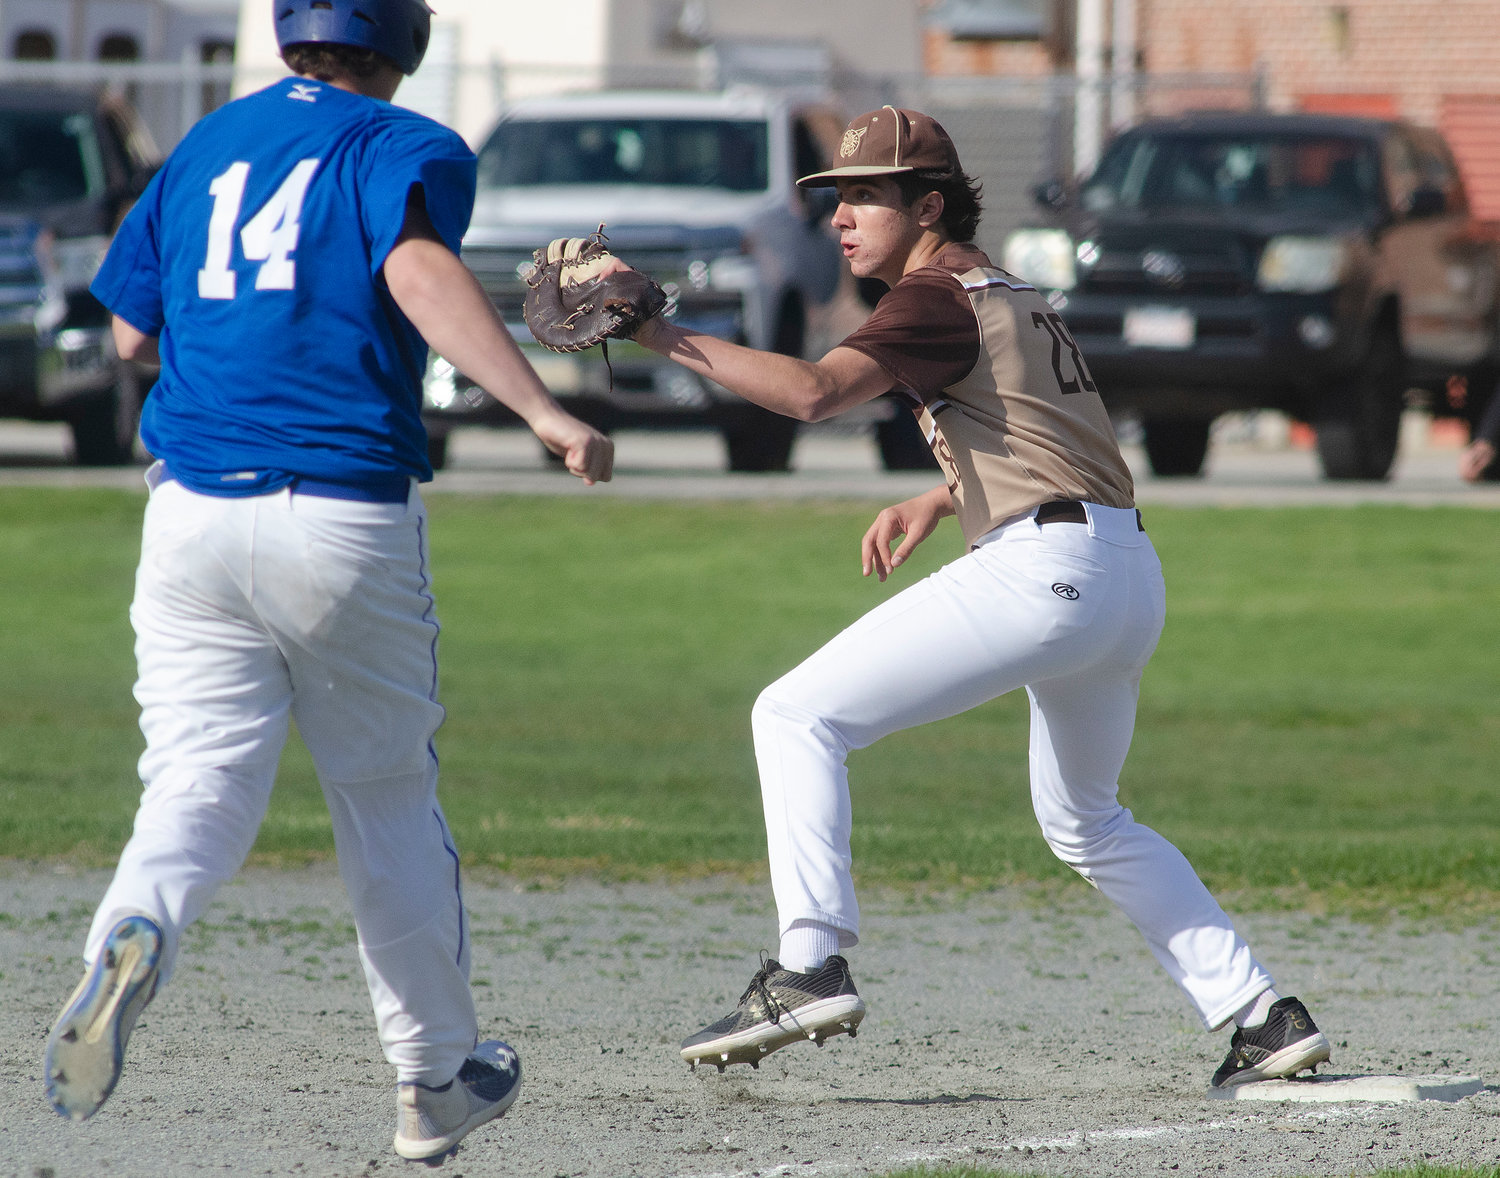 First baseman Max Morotti makes a catch at first to record an out during the team’s game against Holbrook. Offensively Morotti went 1 for 3 with a triple and 2 runs scored.